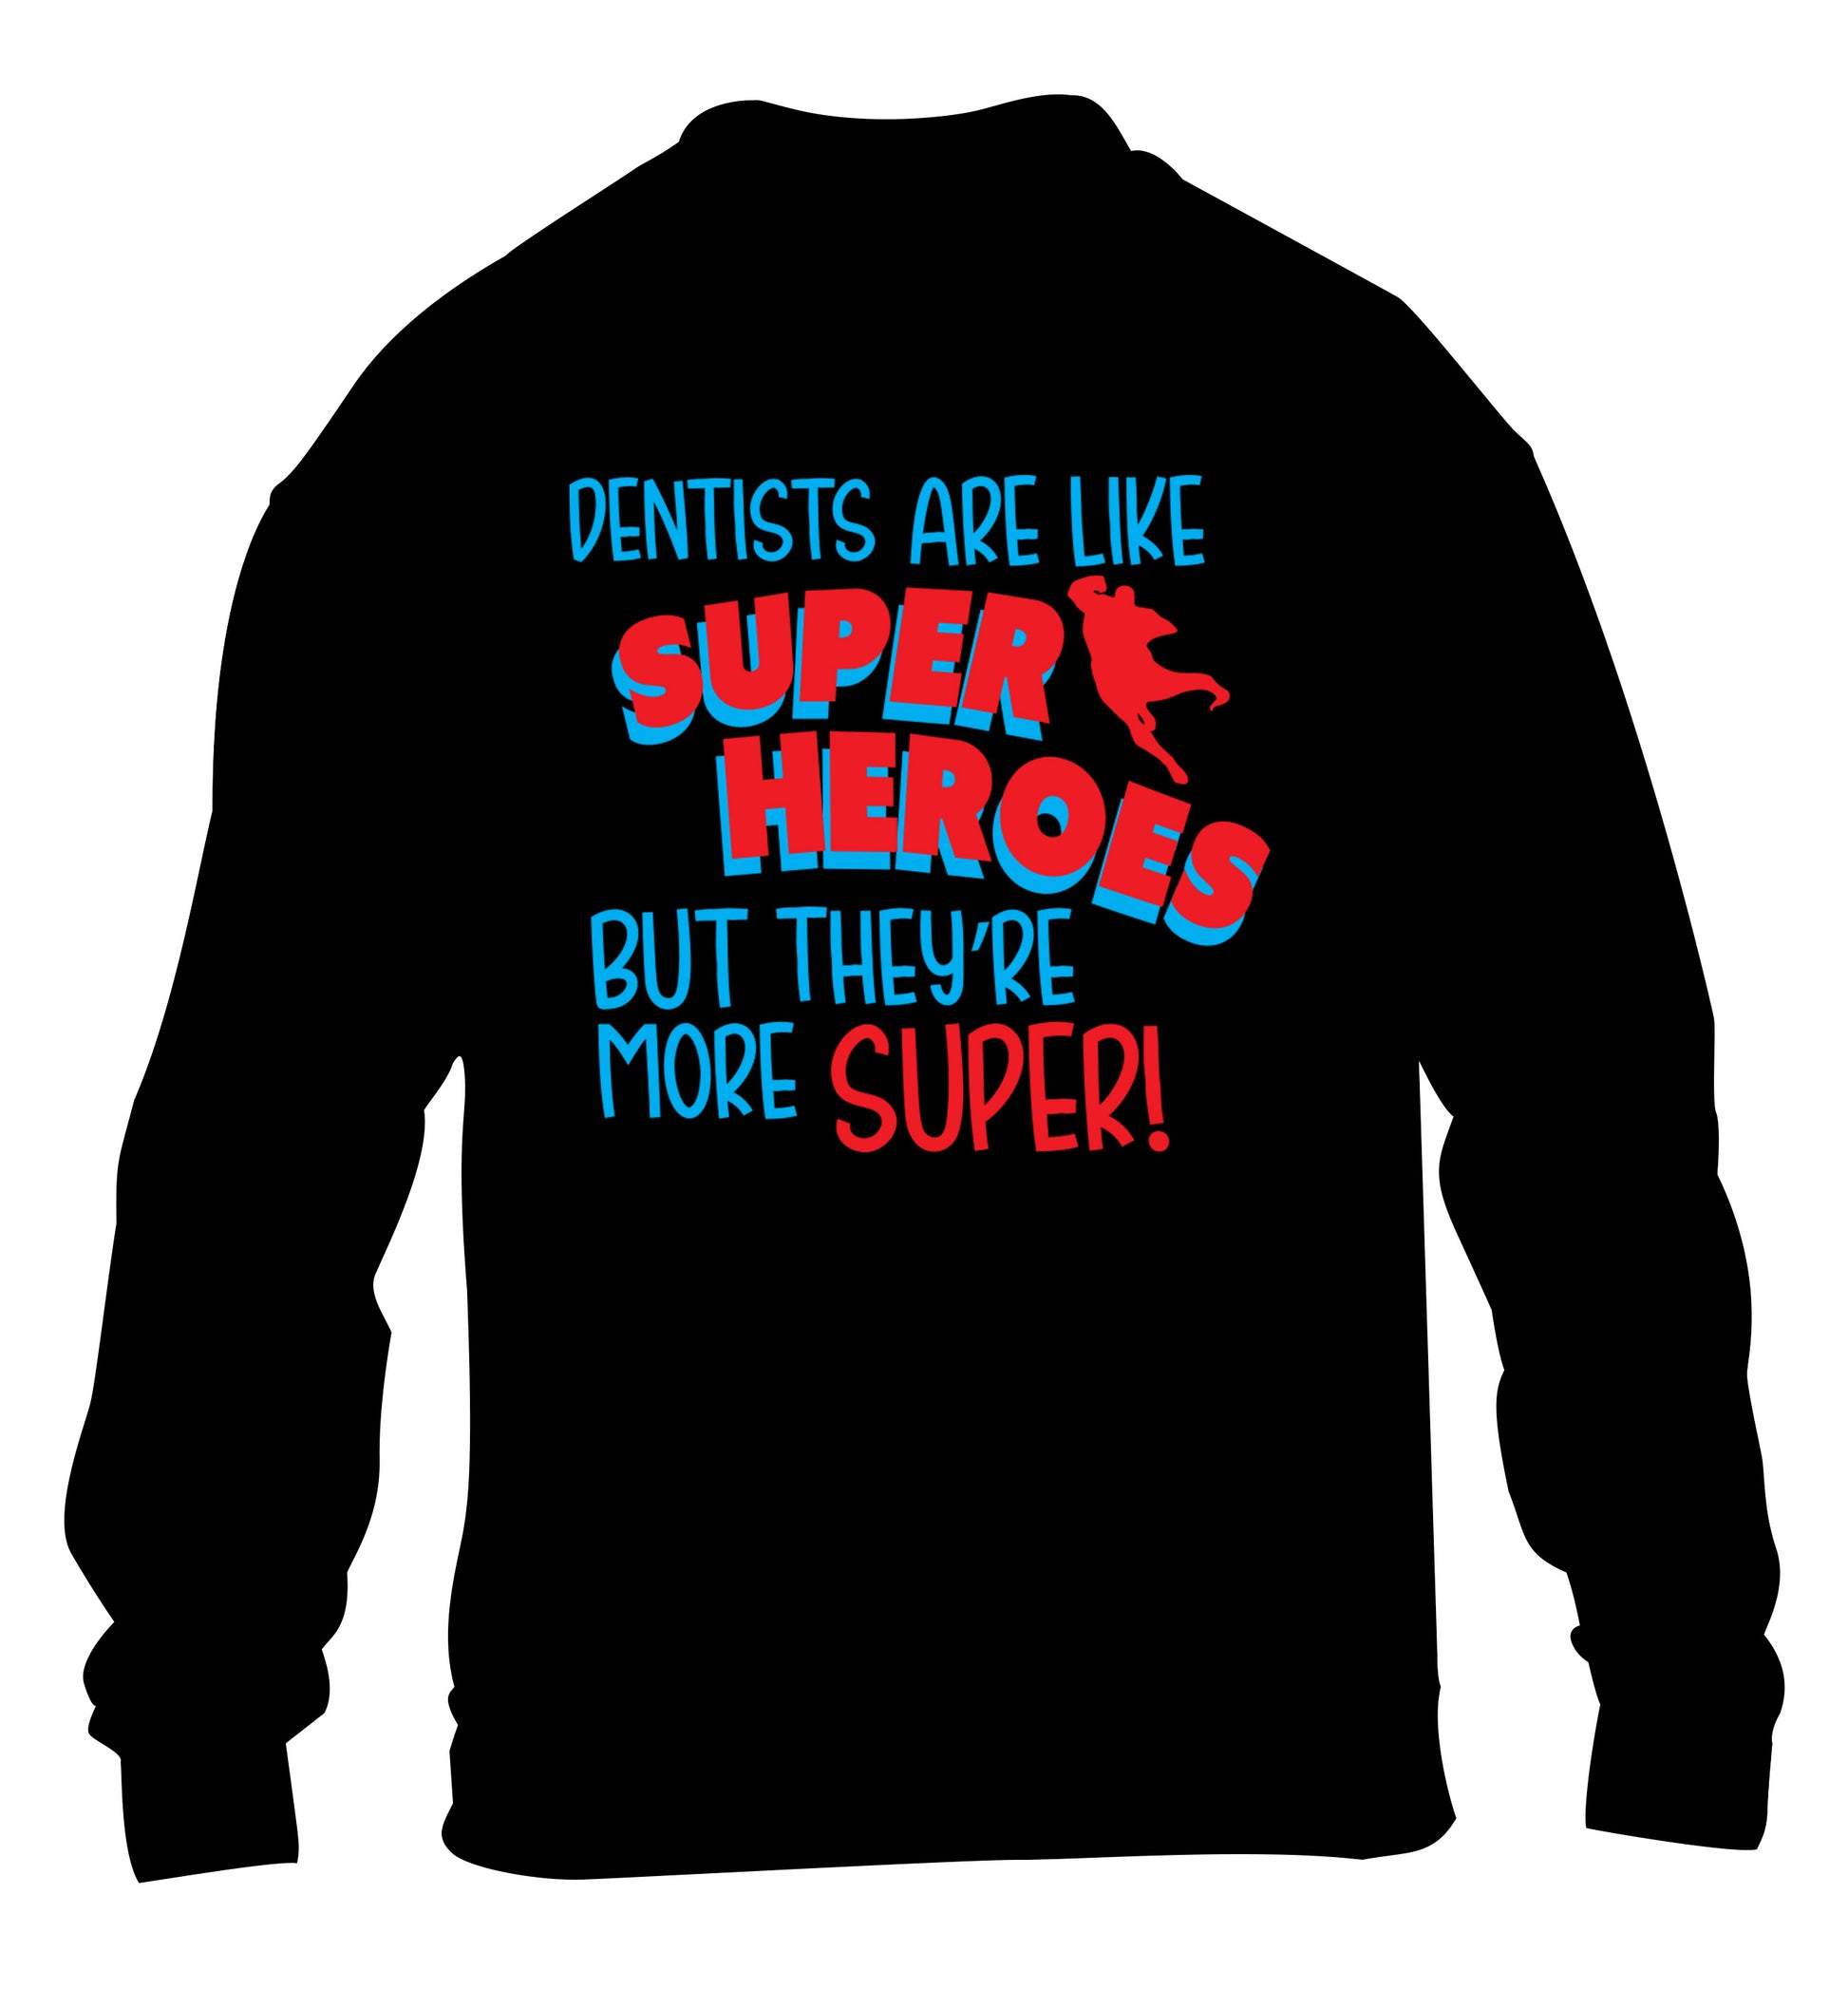 Dentists are like superheros but they're more super children's black sweater 12-13 Years